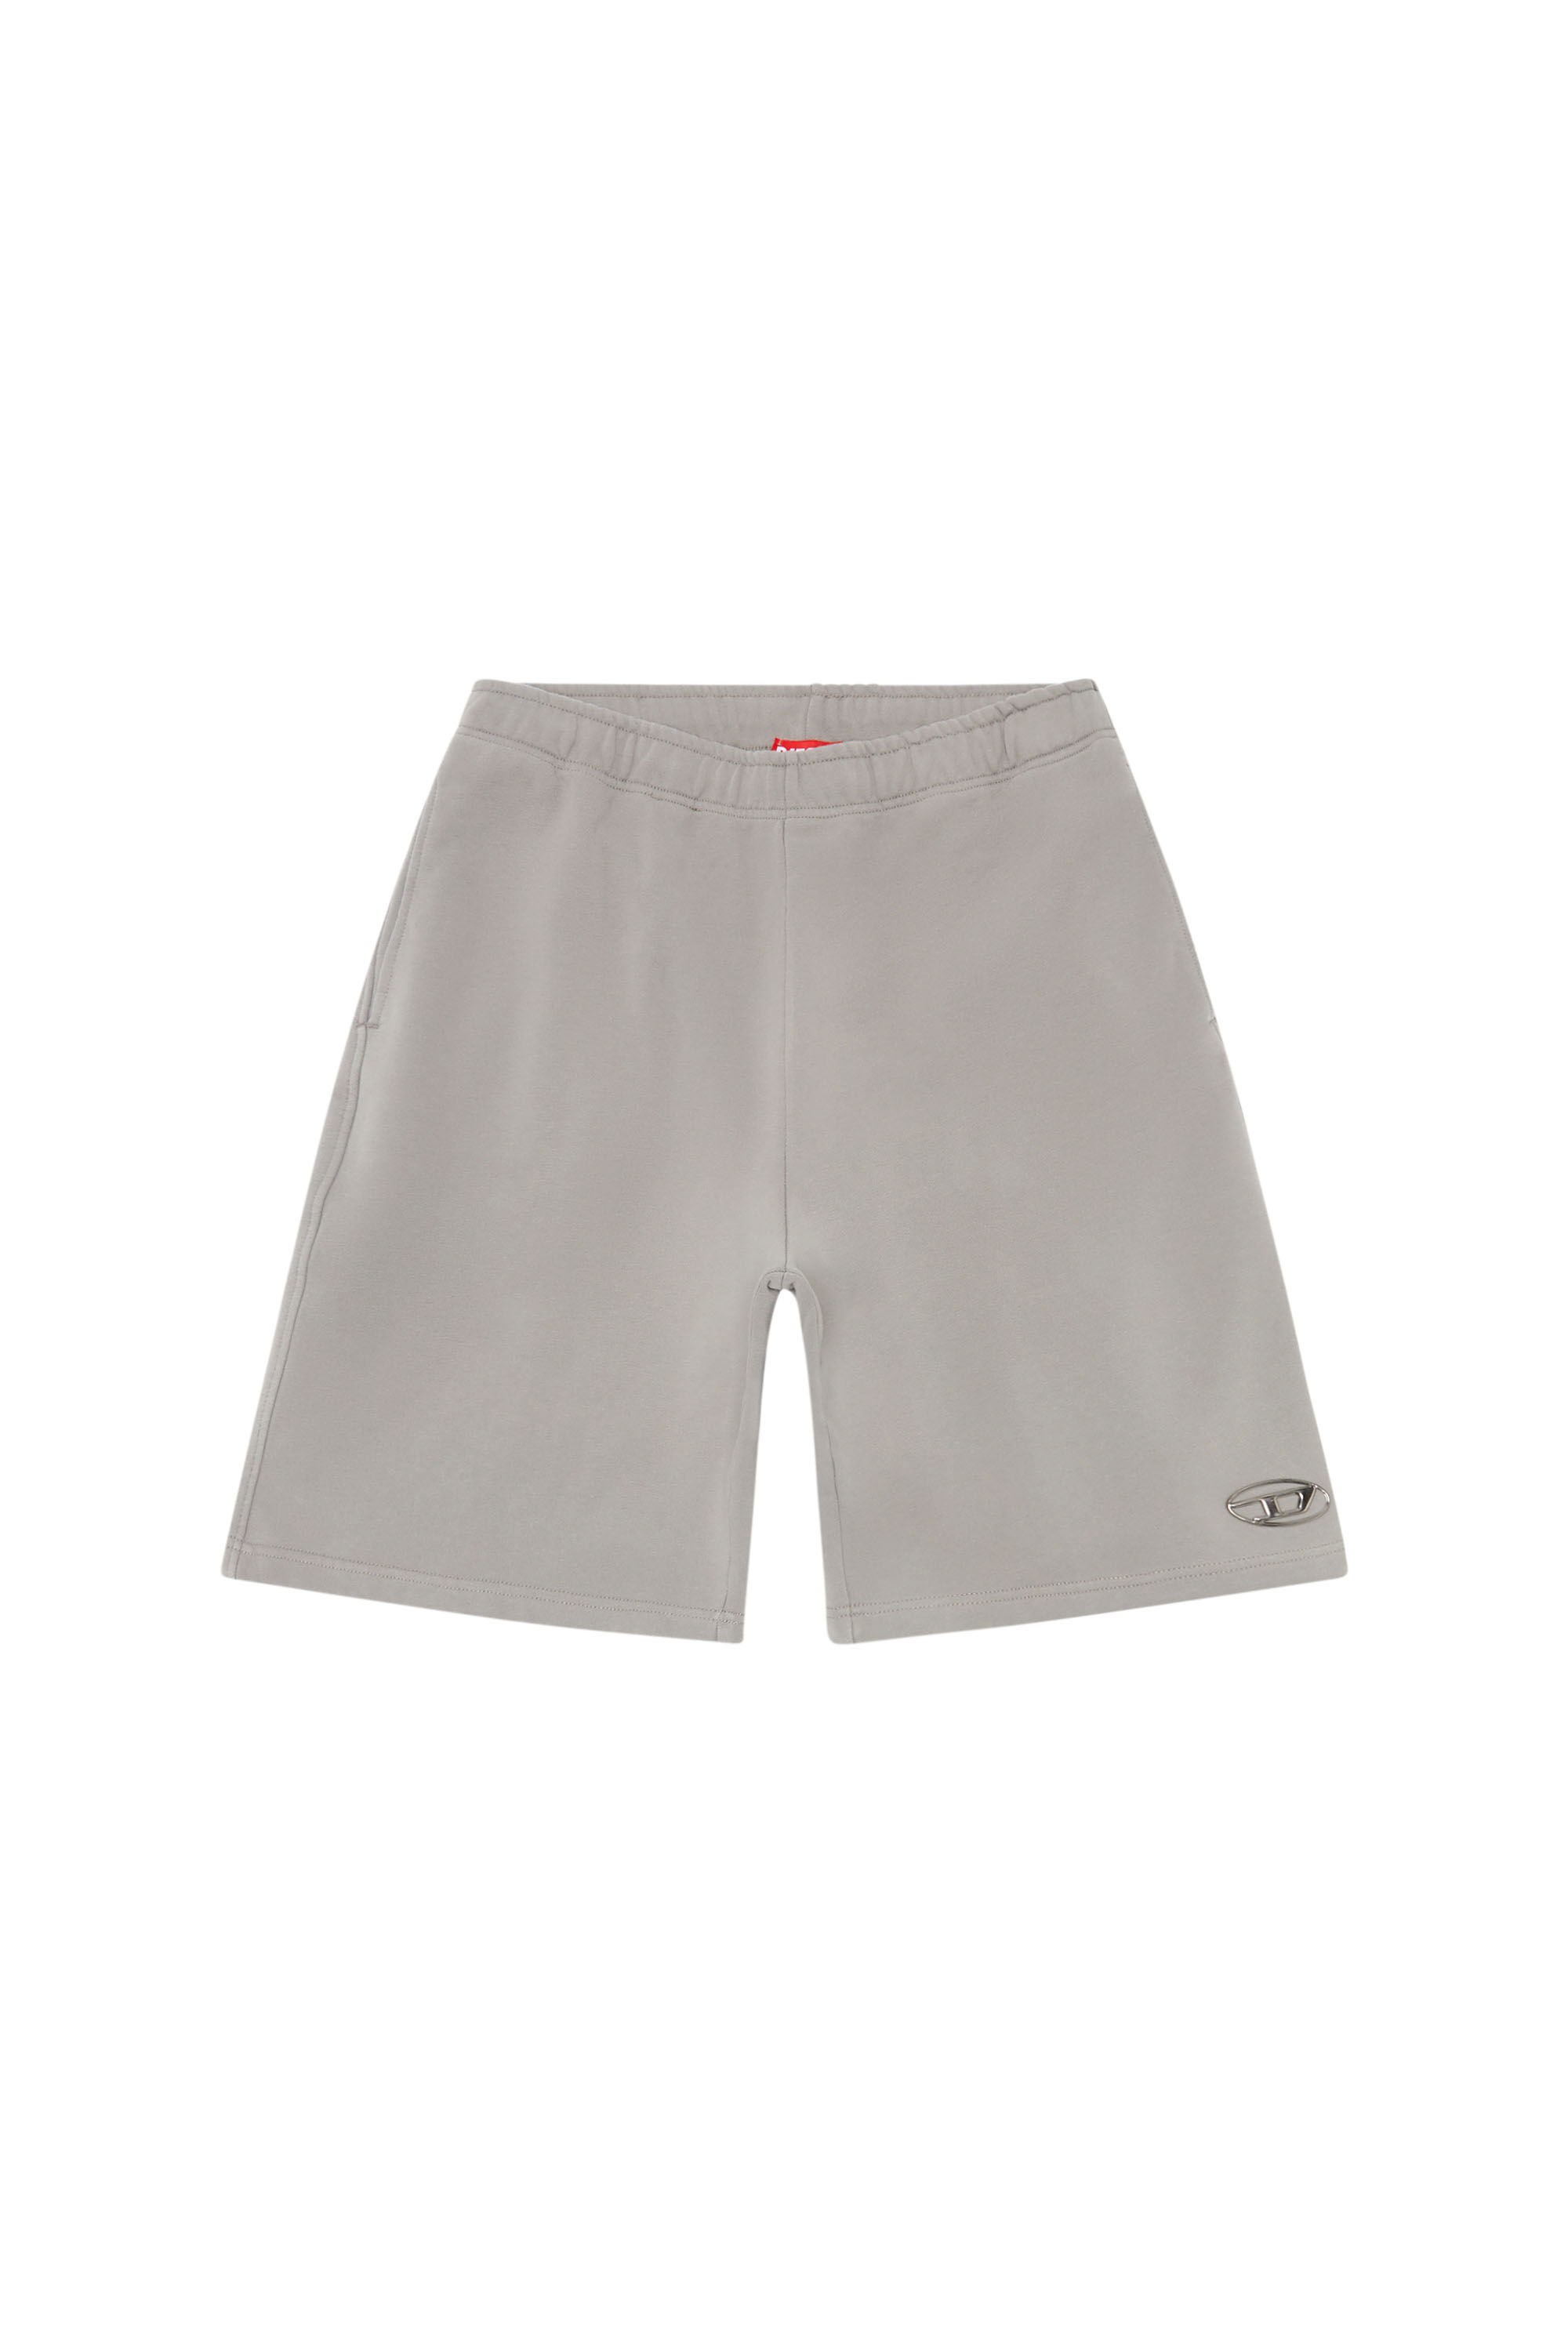 Mersedes Anchor Inc. Sweat Shorts